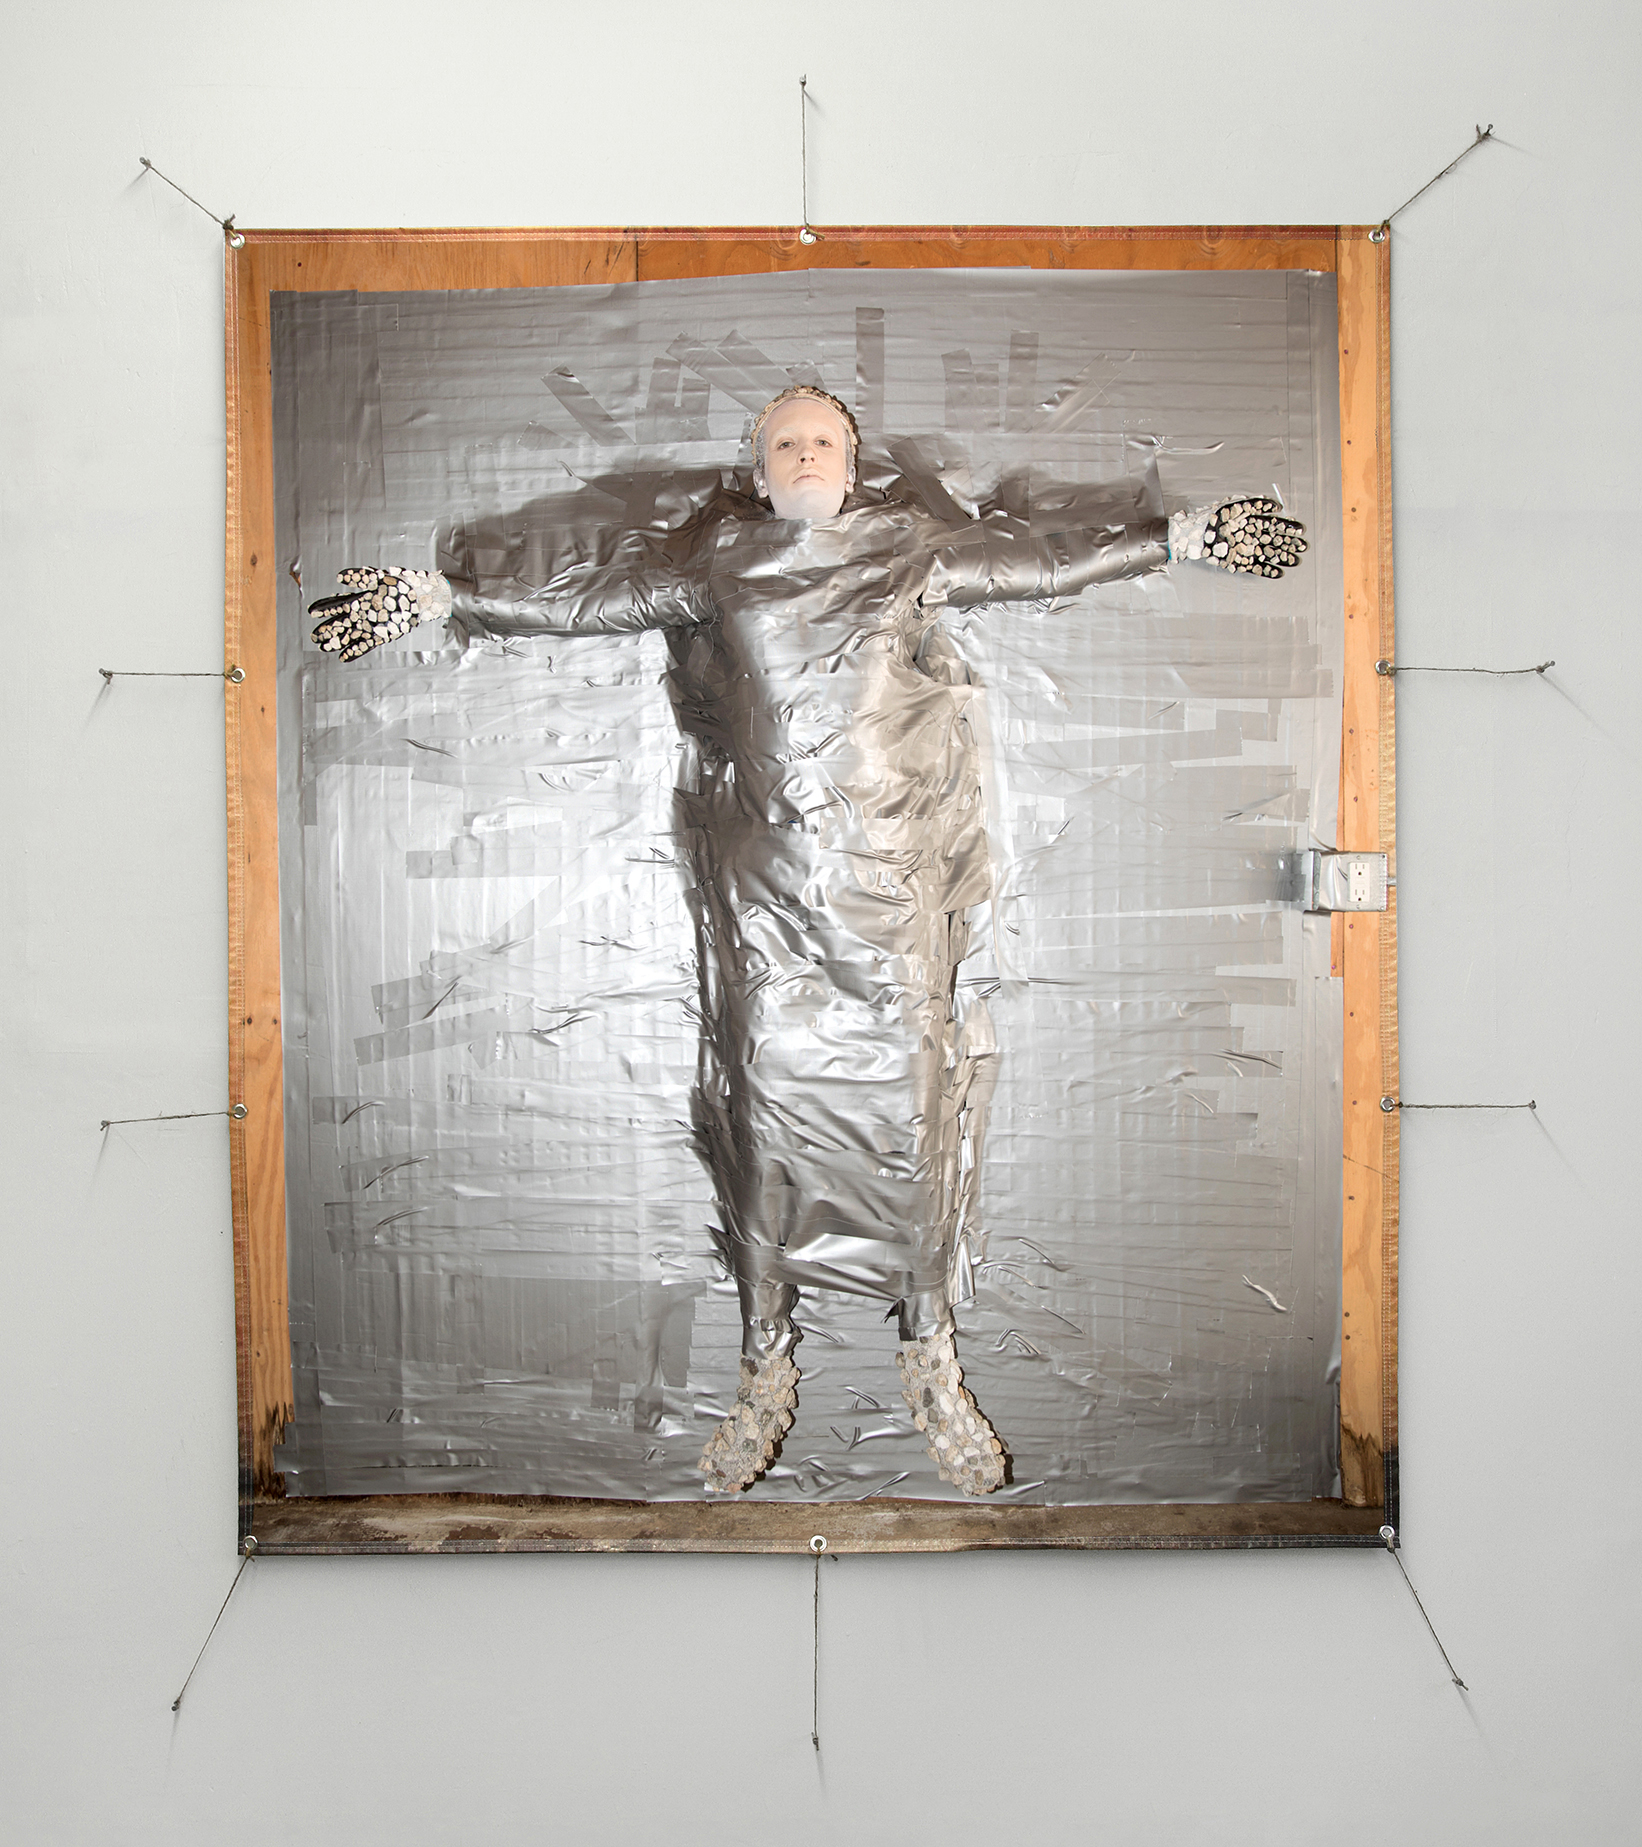 Vinyl photographic print of Jesse duct taped to a wooden wall.